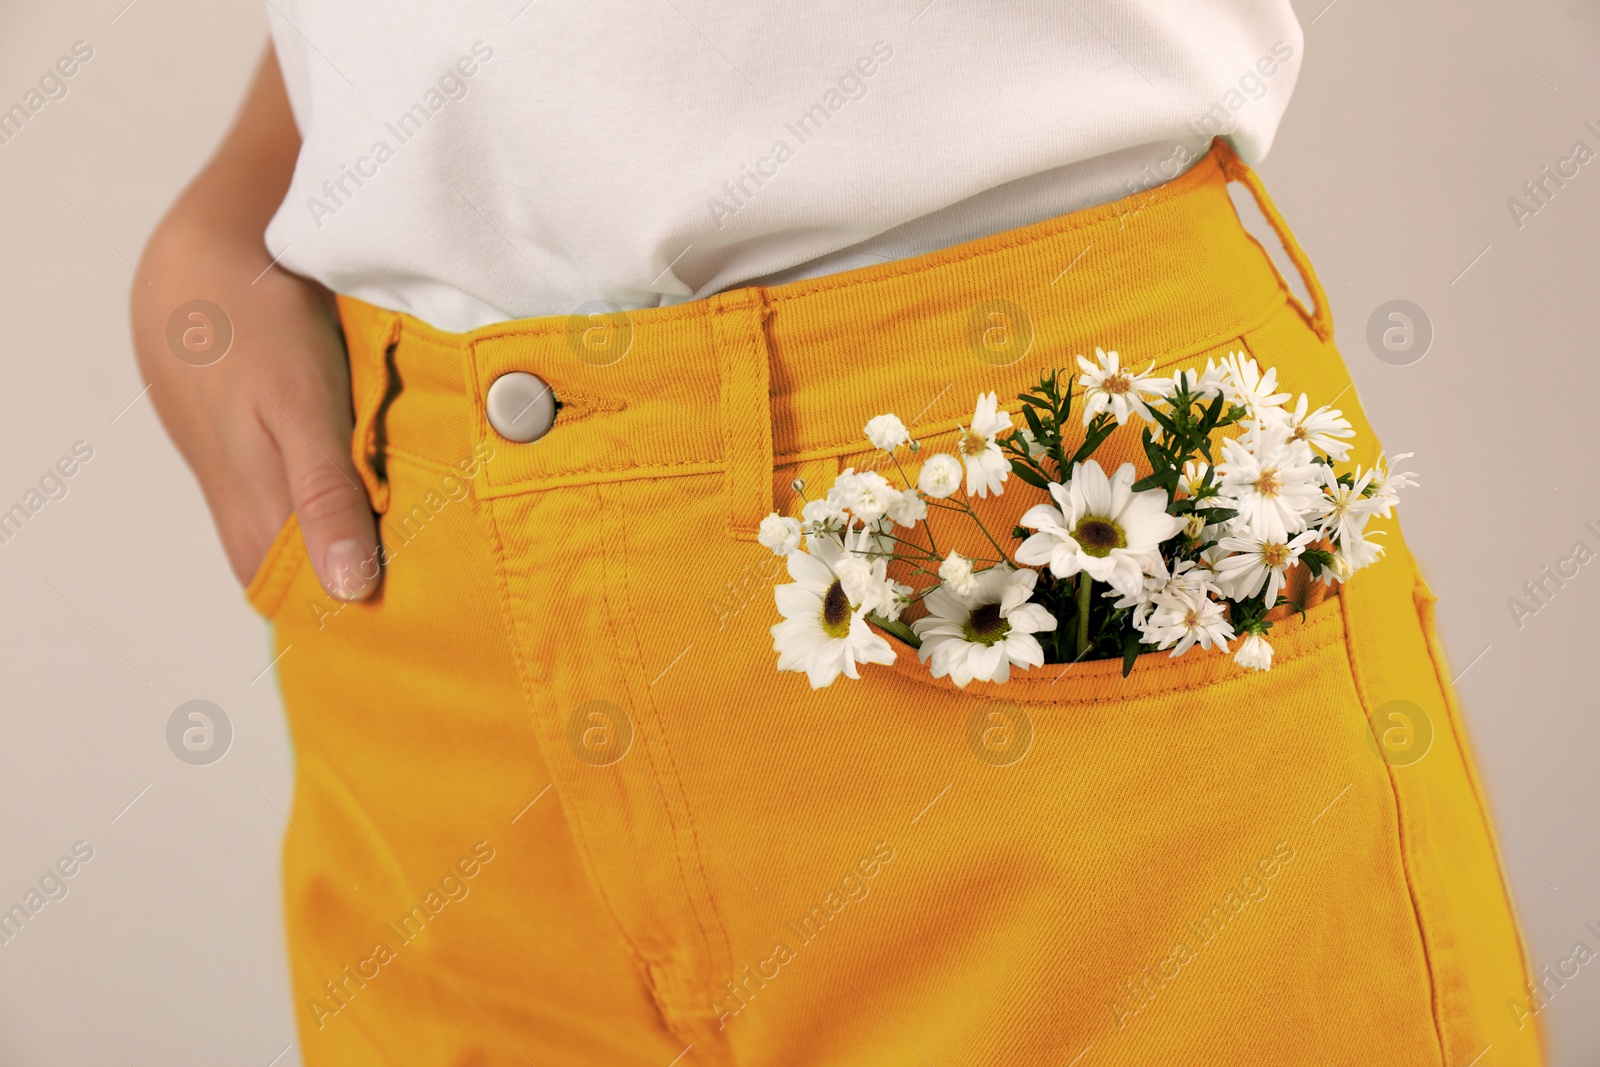 Image of Woman with beautiful tender flowers in pocket of orange jeans on light background, closeup